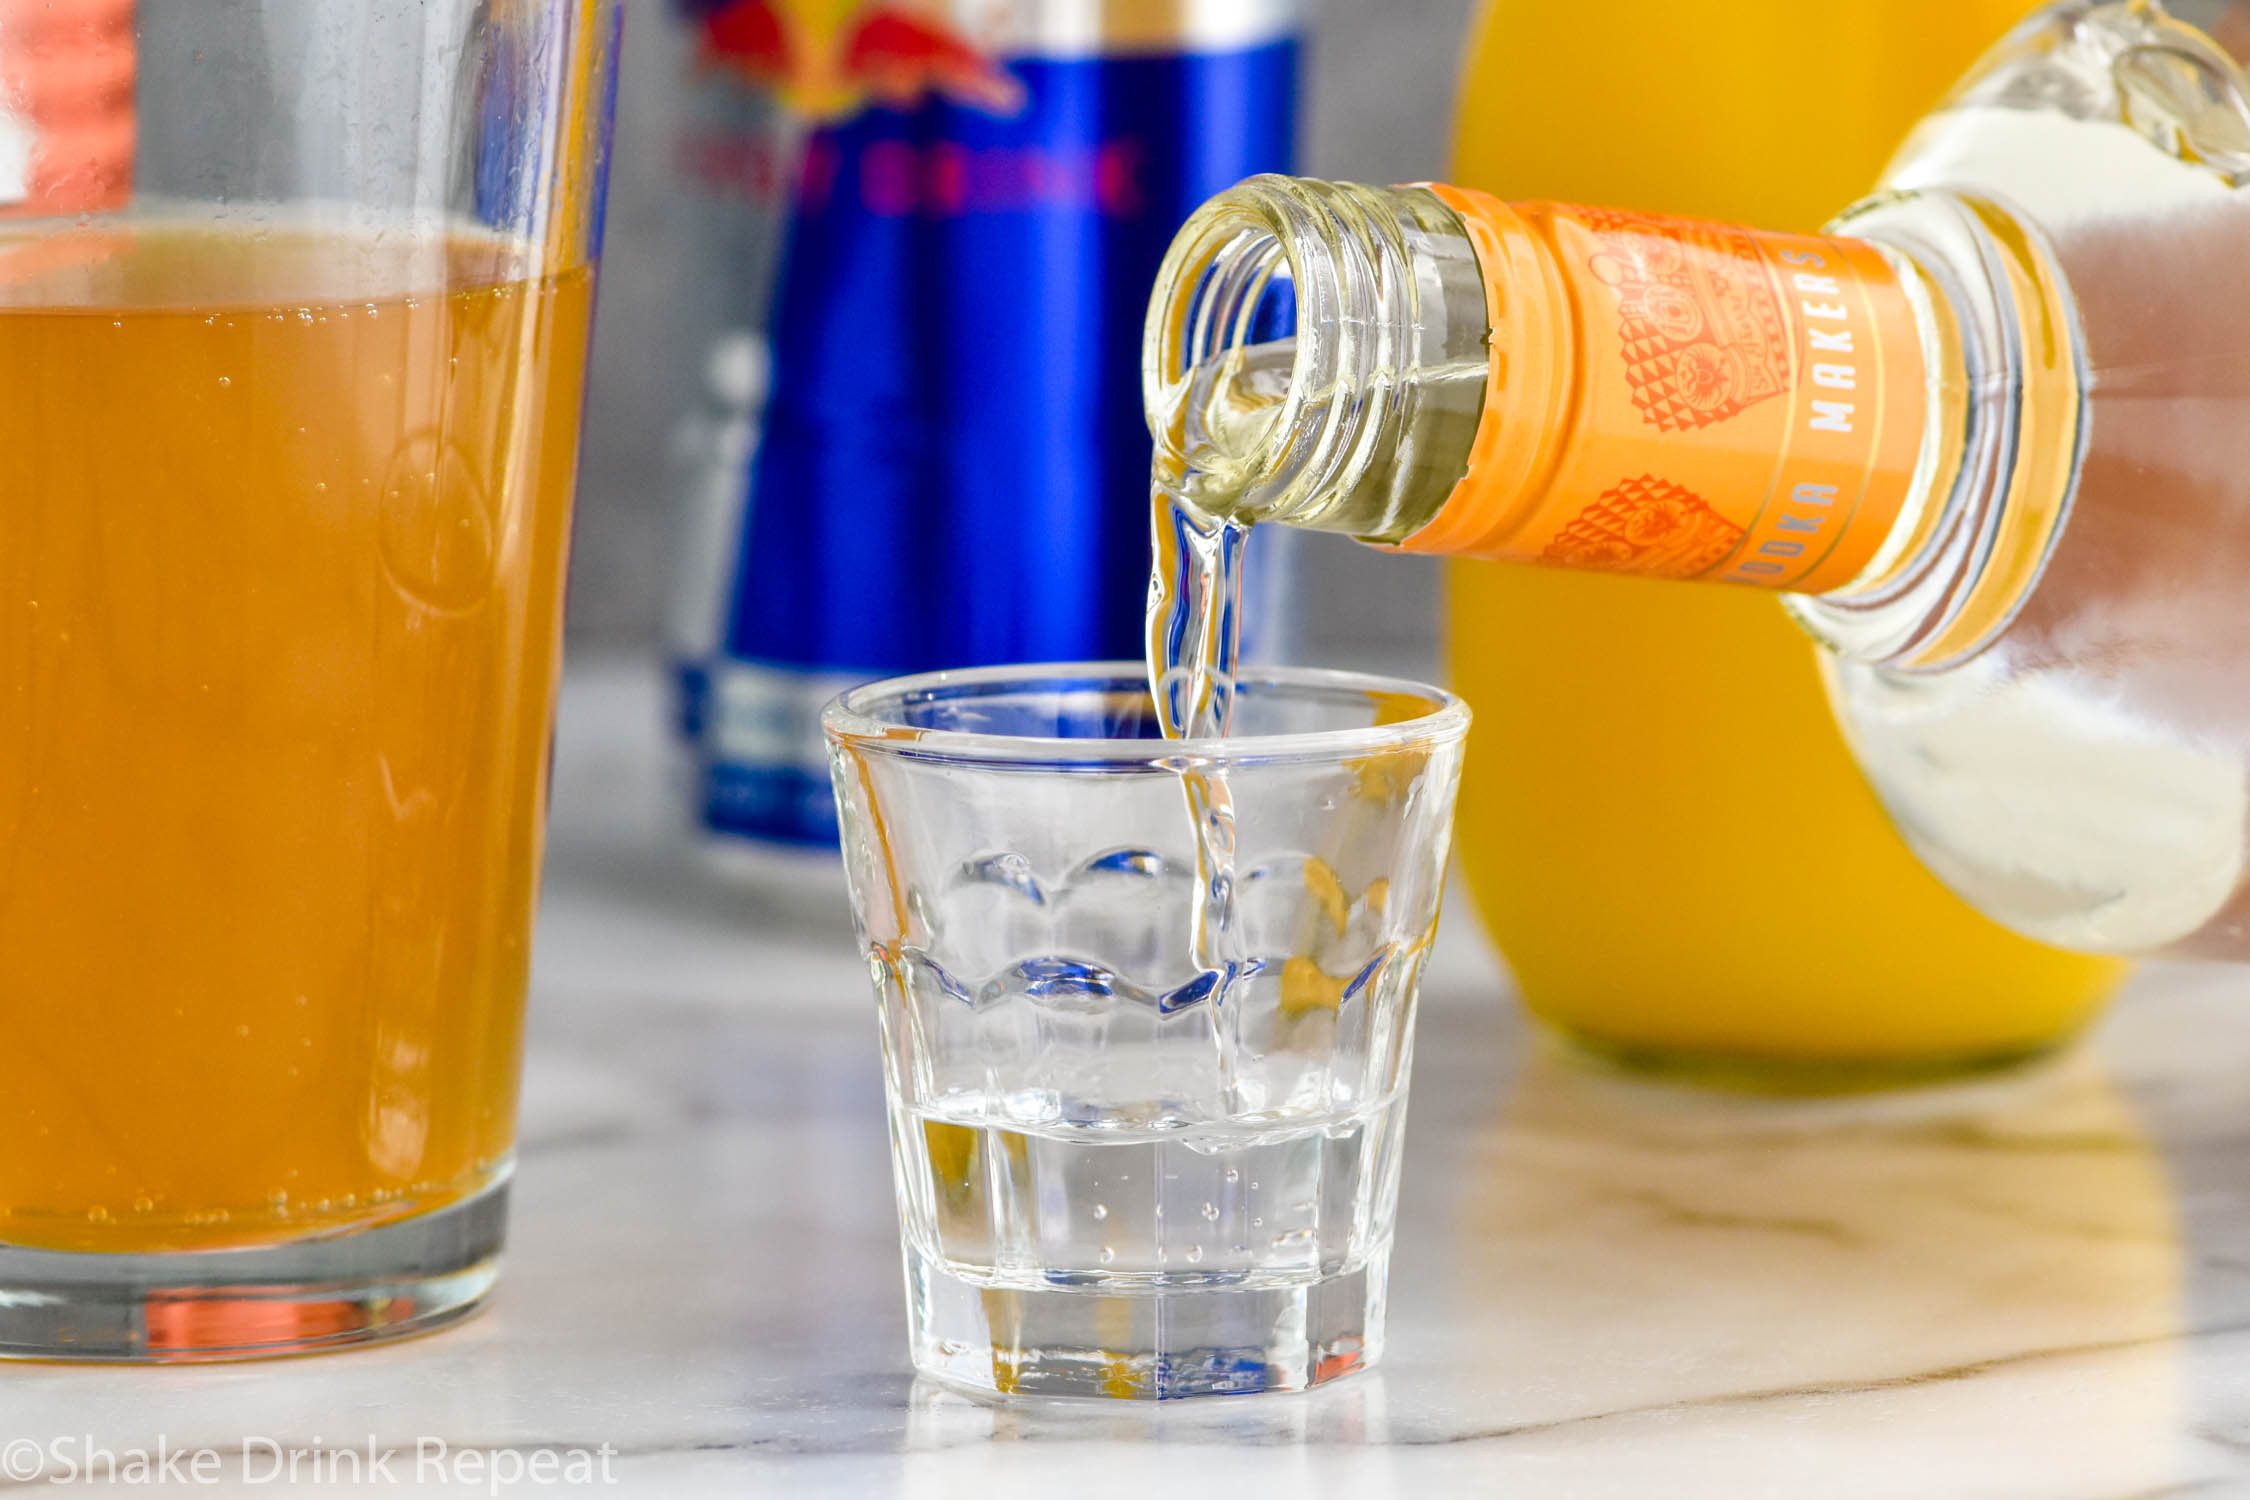 Side view of bottle of mandarin vodka being poured into a shot glass for Cactus Cooler Shot recipe. Pint glass of Red Bull, Red Bull can, and bottle of orange juice in the background.